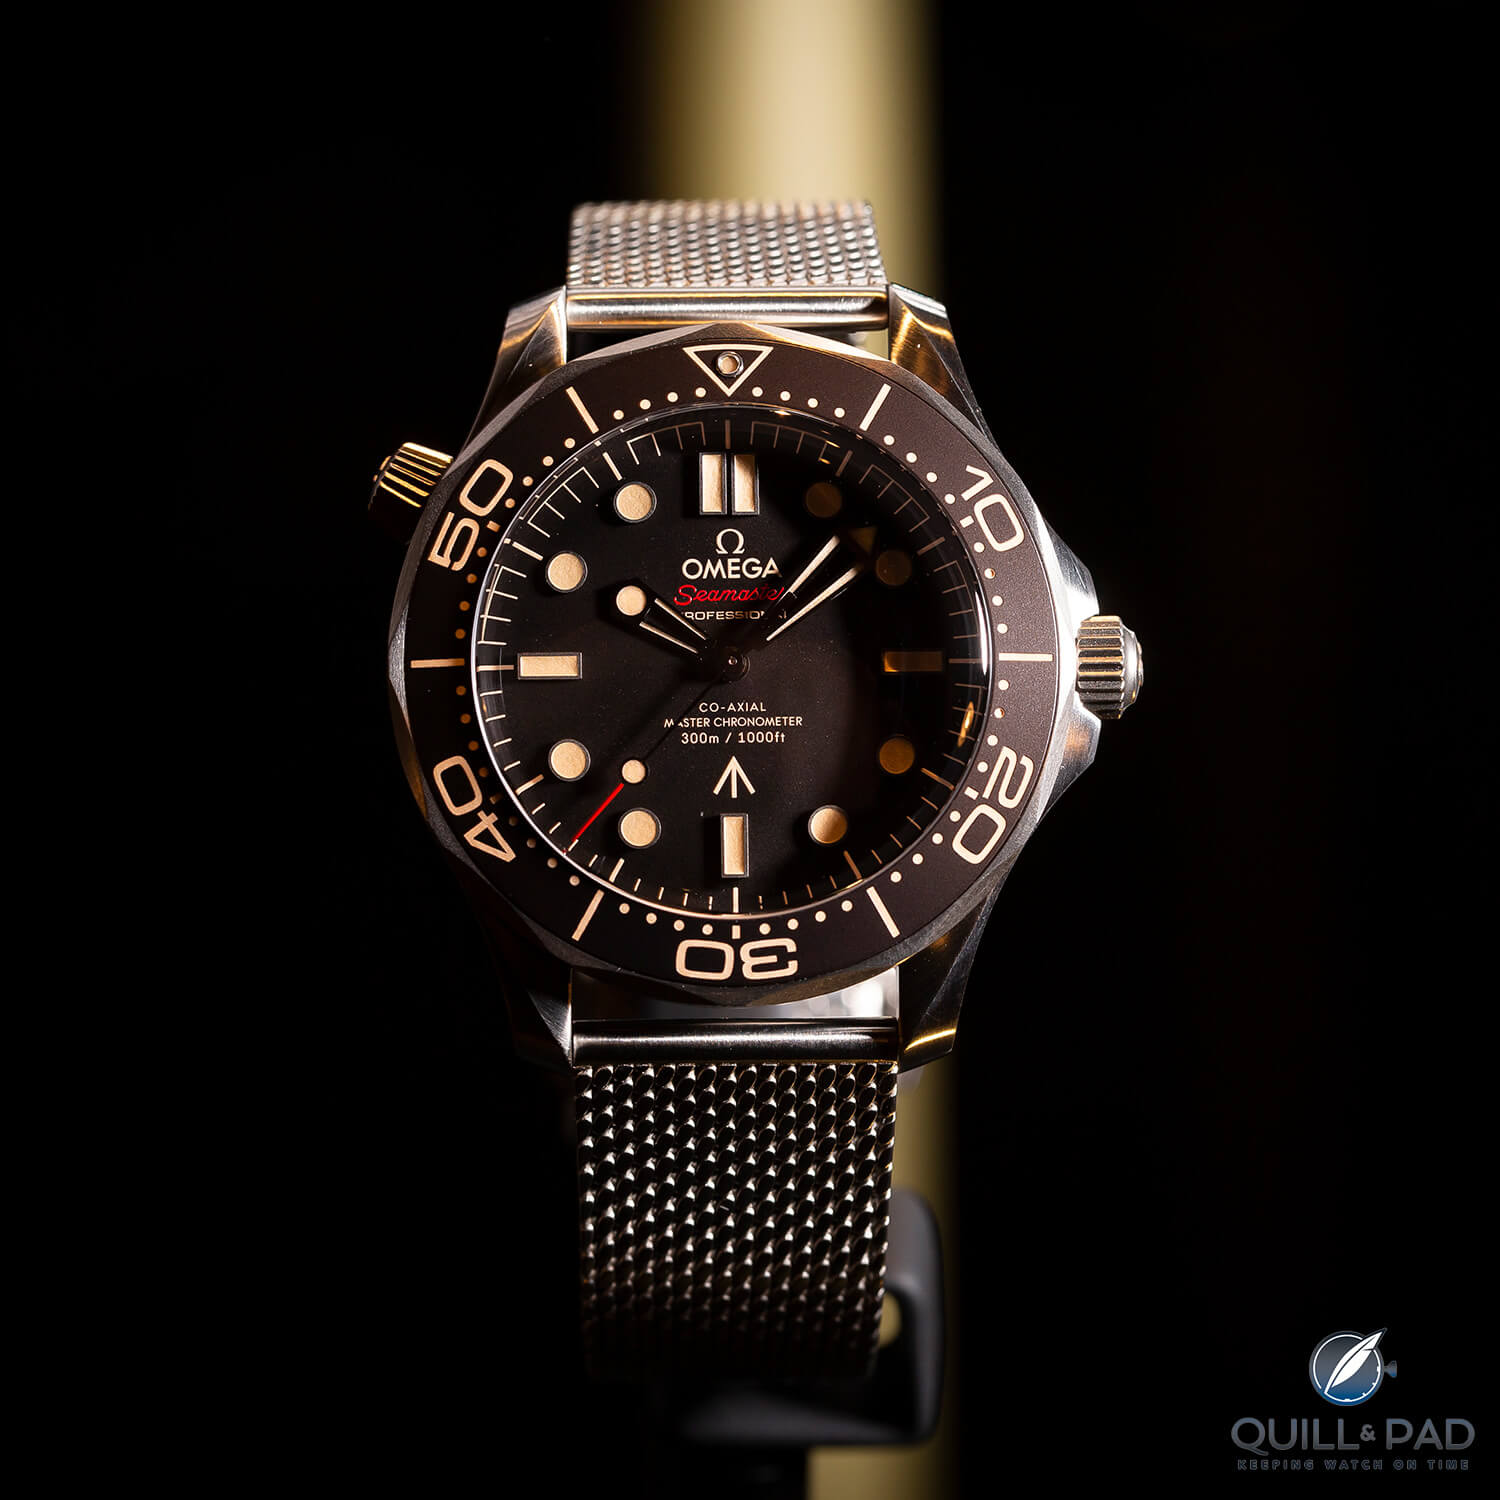 James Bond Had 'No Time To Die' With His Latest Omega Seamaster Diver 300M Co-Axial Master Chronometer 007 - Quill & Pad